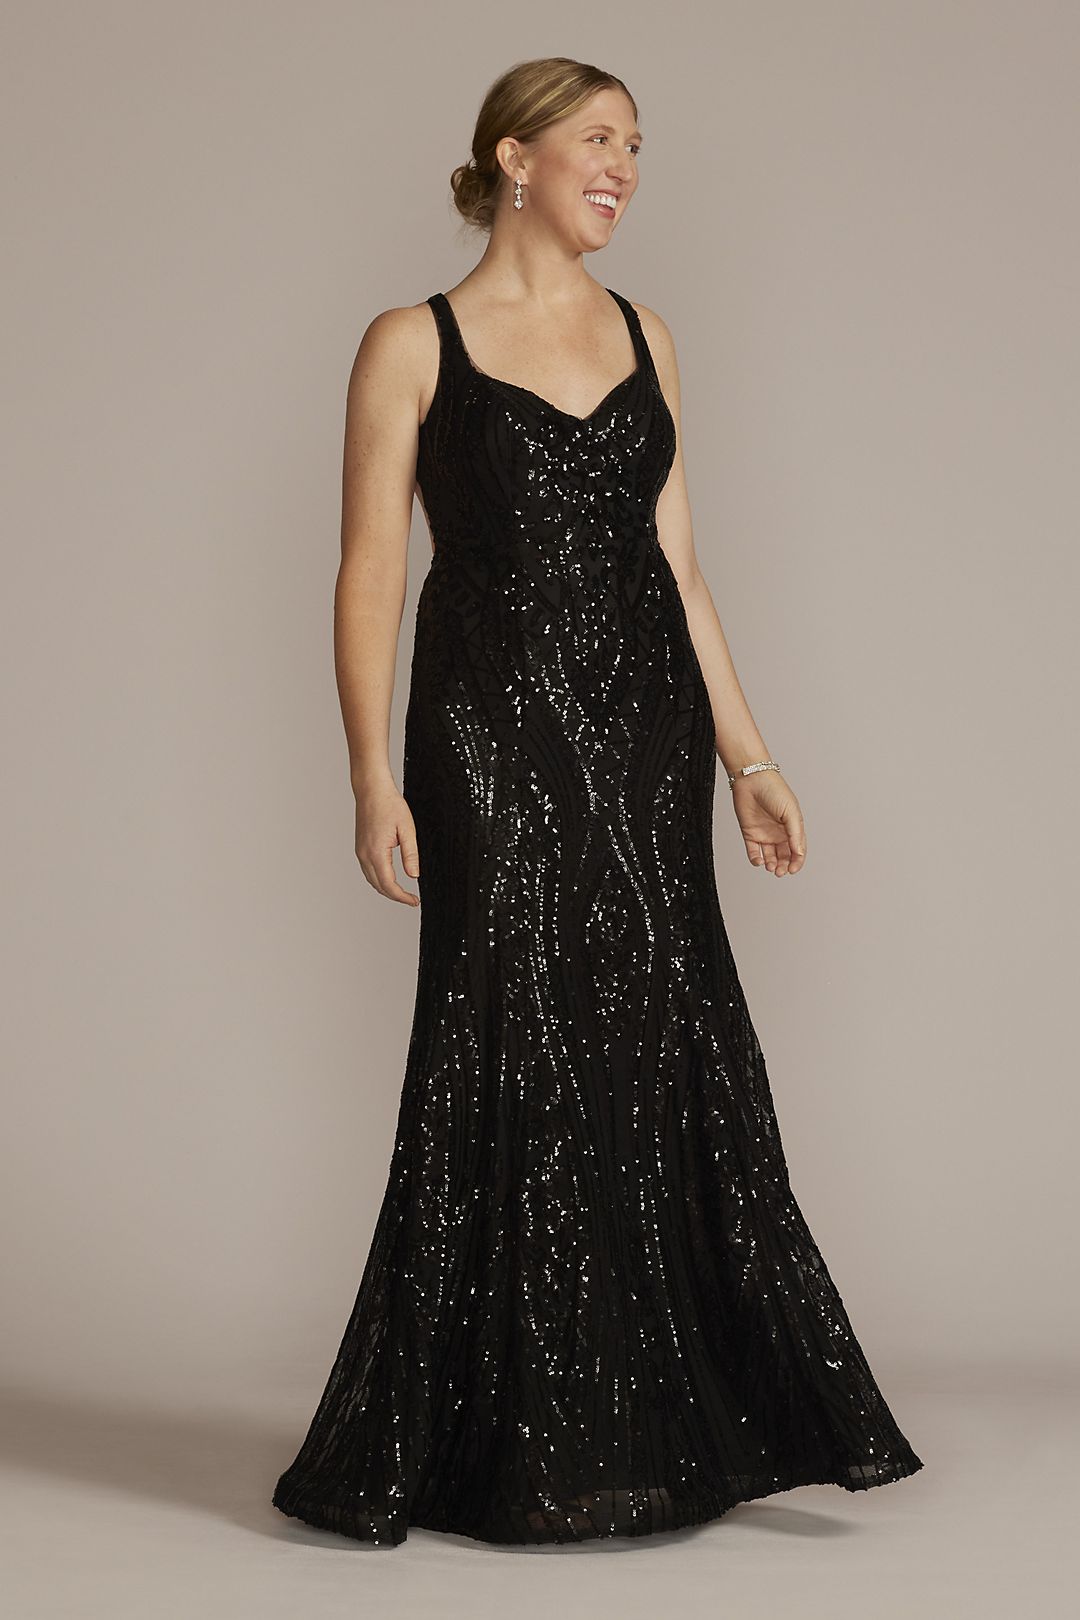 Patterned Stretch Sequin Mermaid Gown Image 1